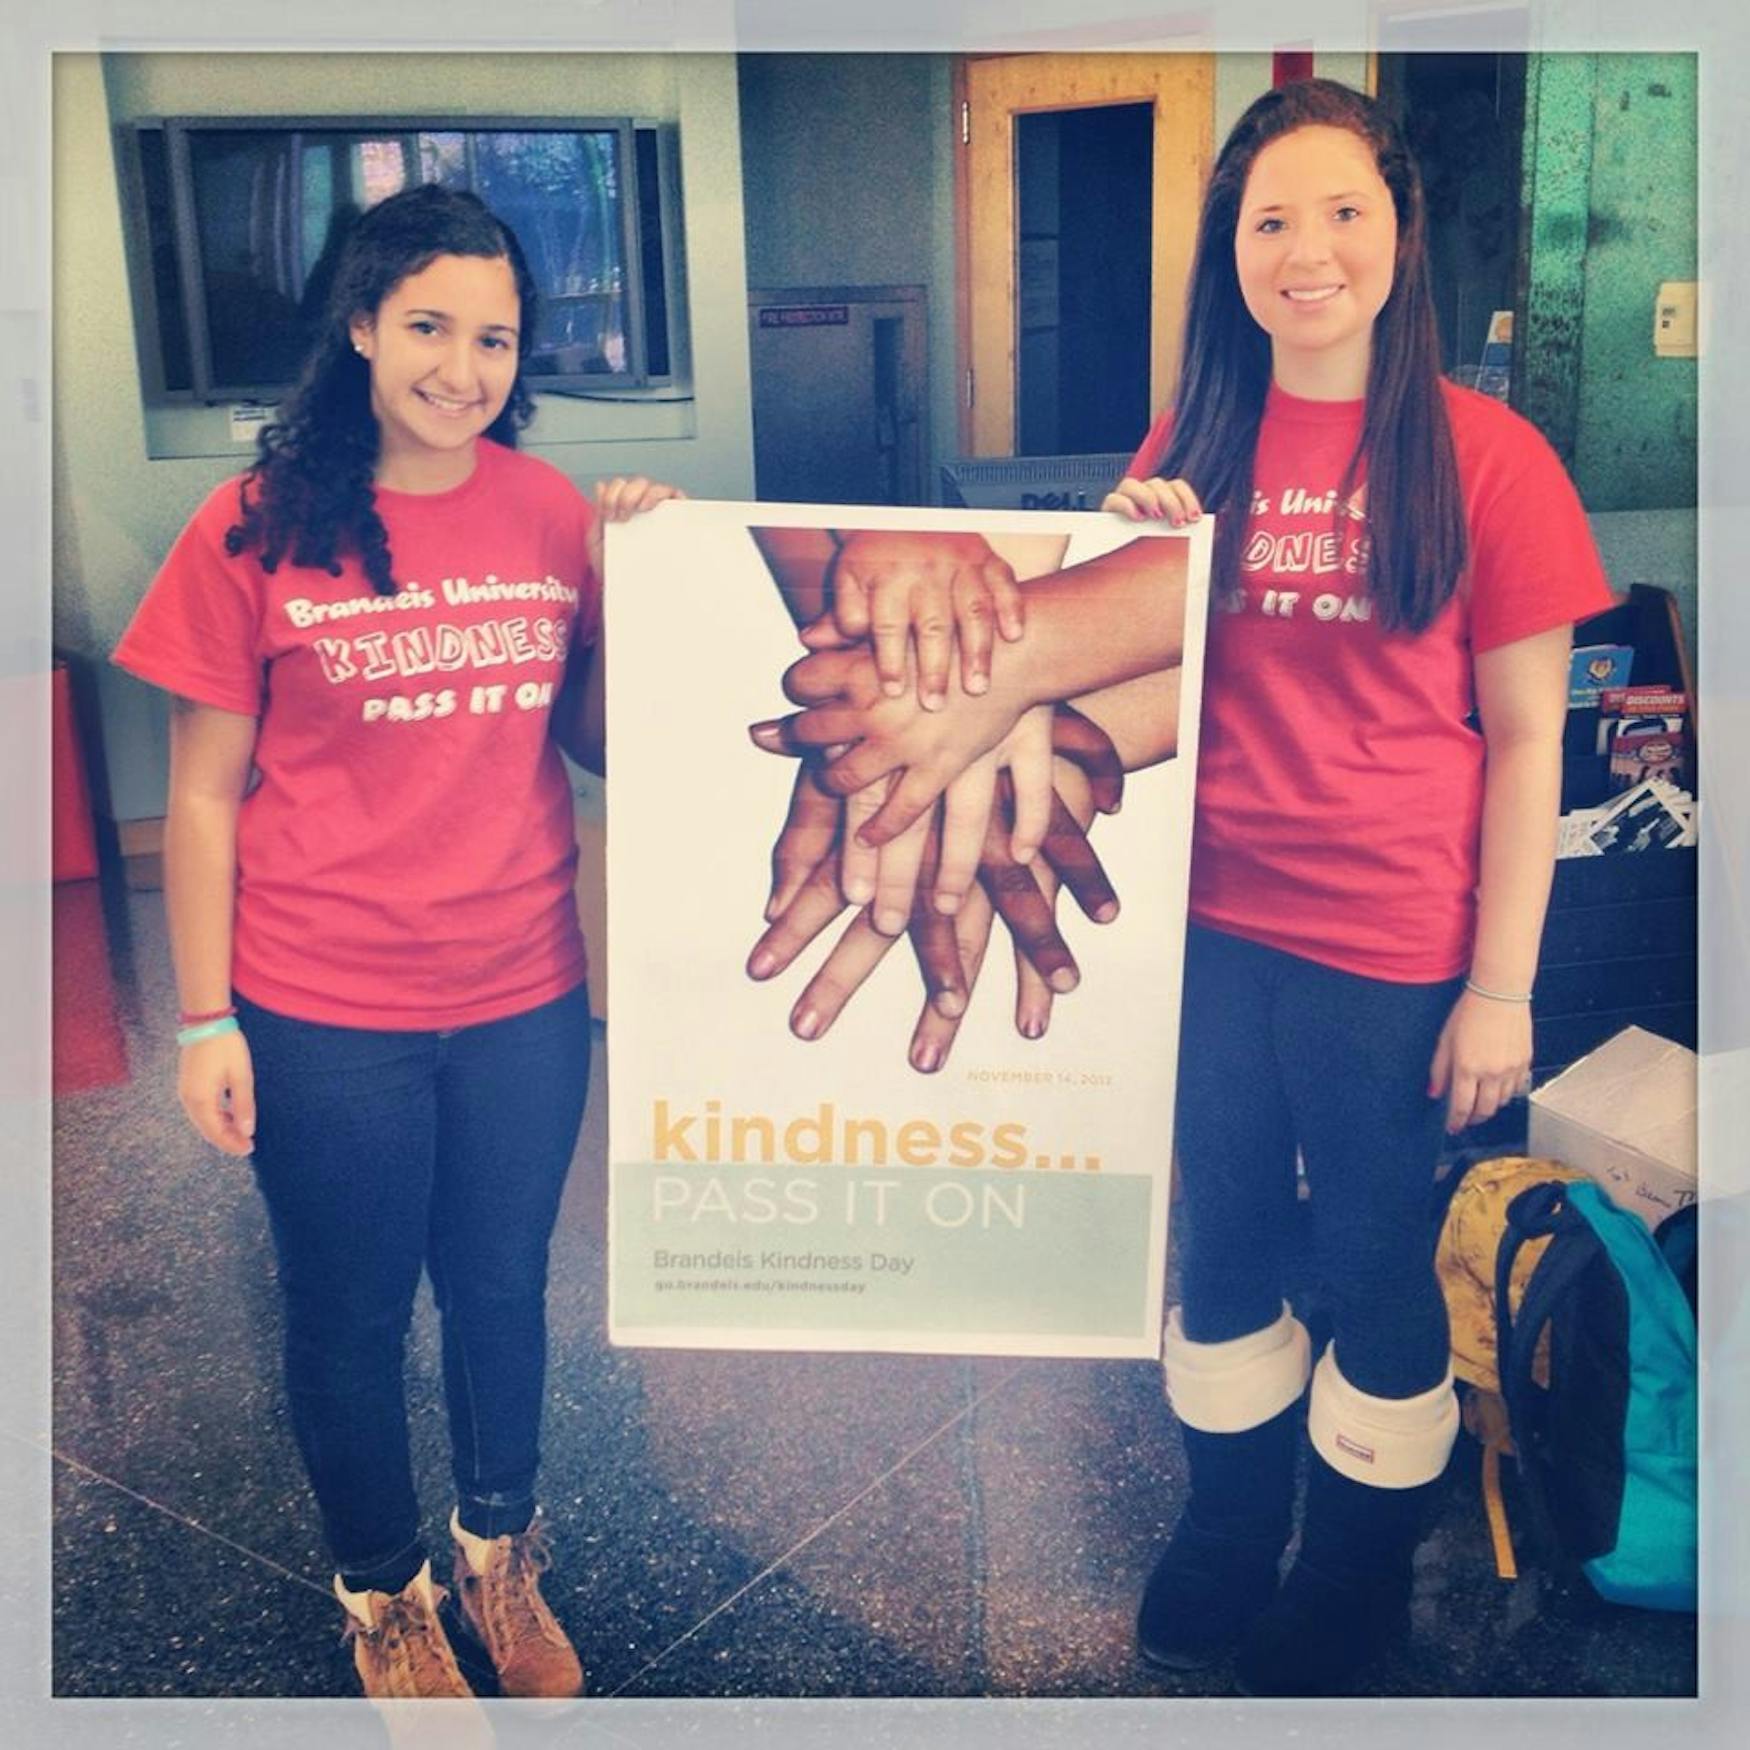 From left, Gabby Zilkha ’16, current Kindness Day coordinator, and Kira Levin ’17, former coordinator.